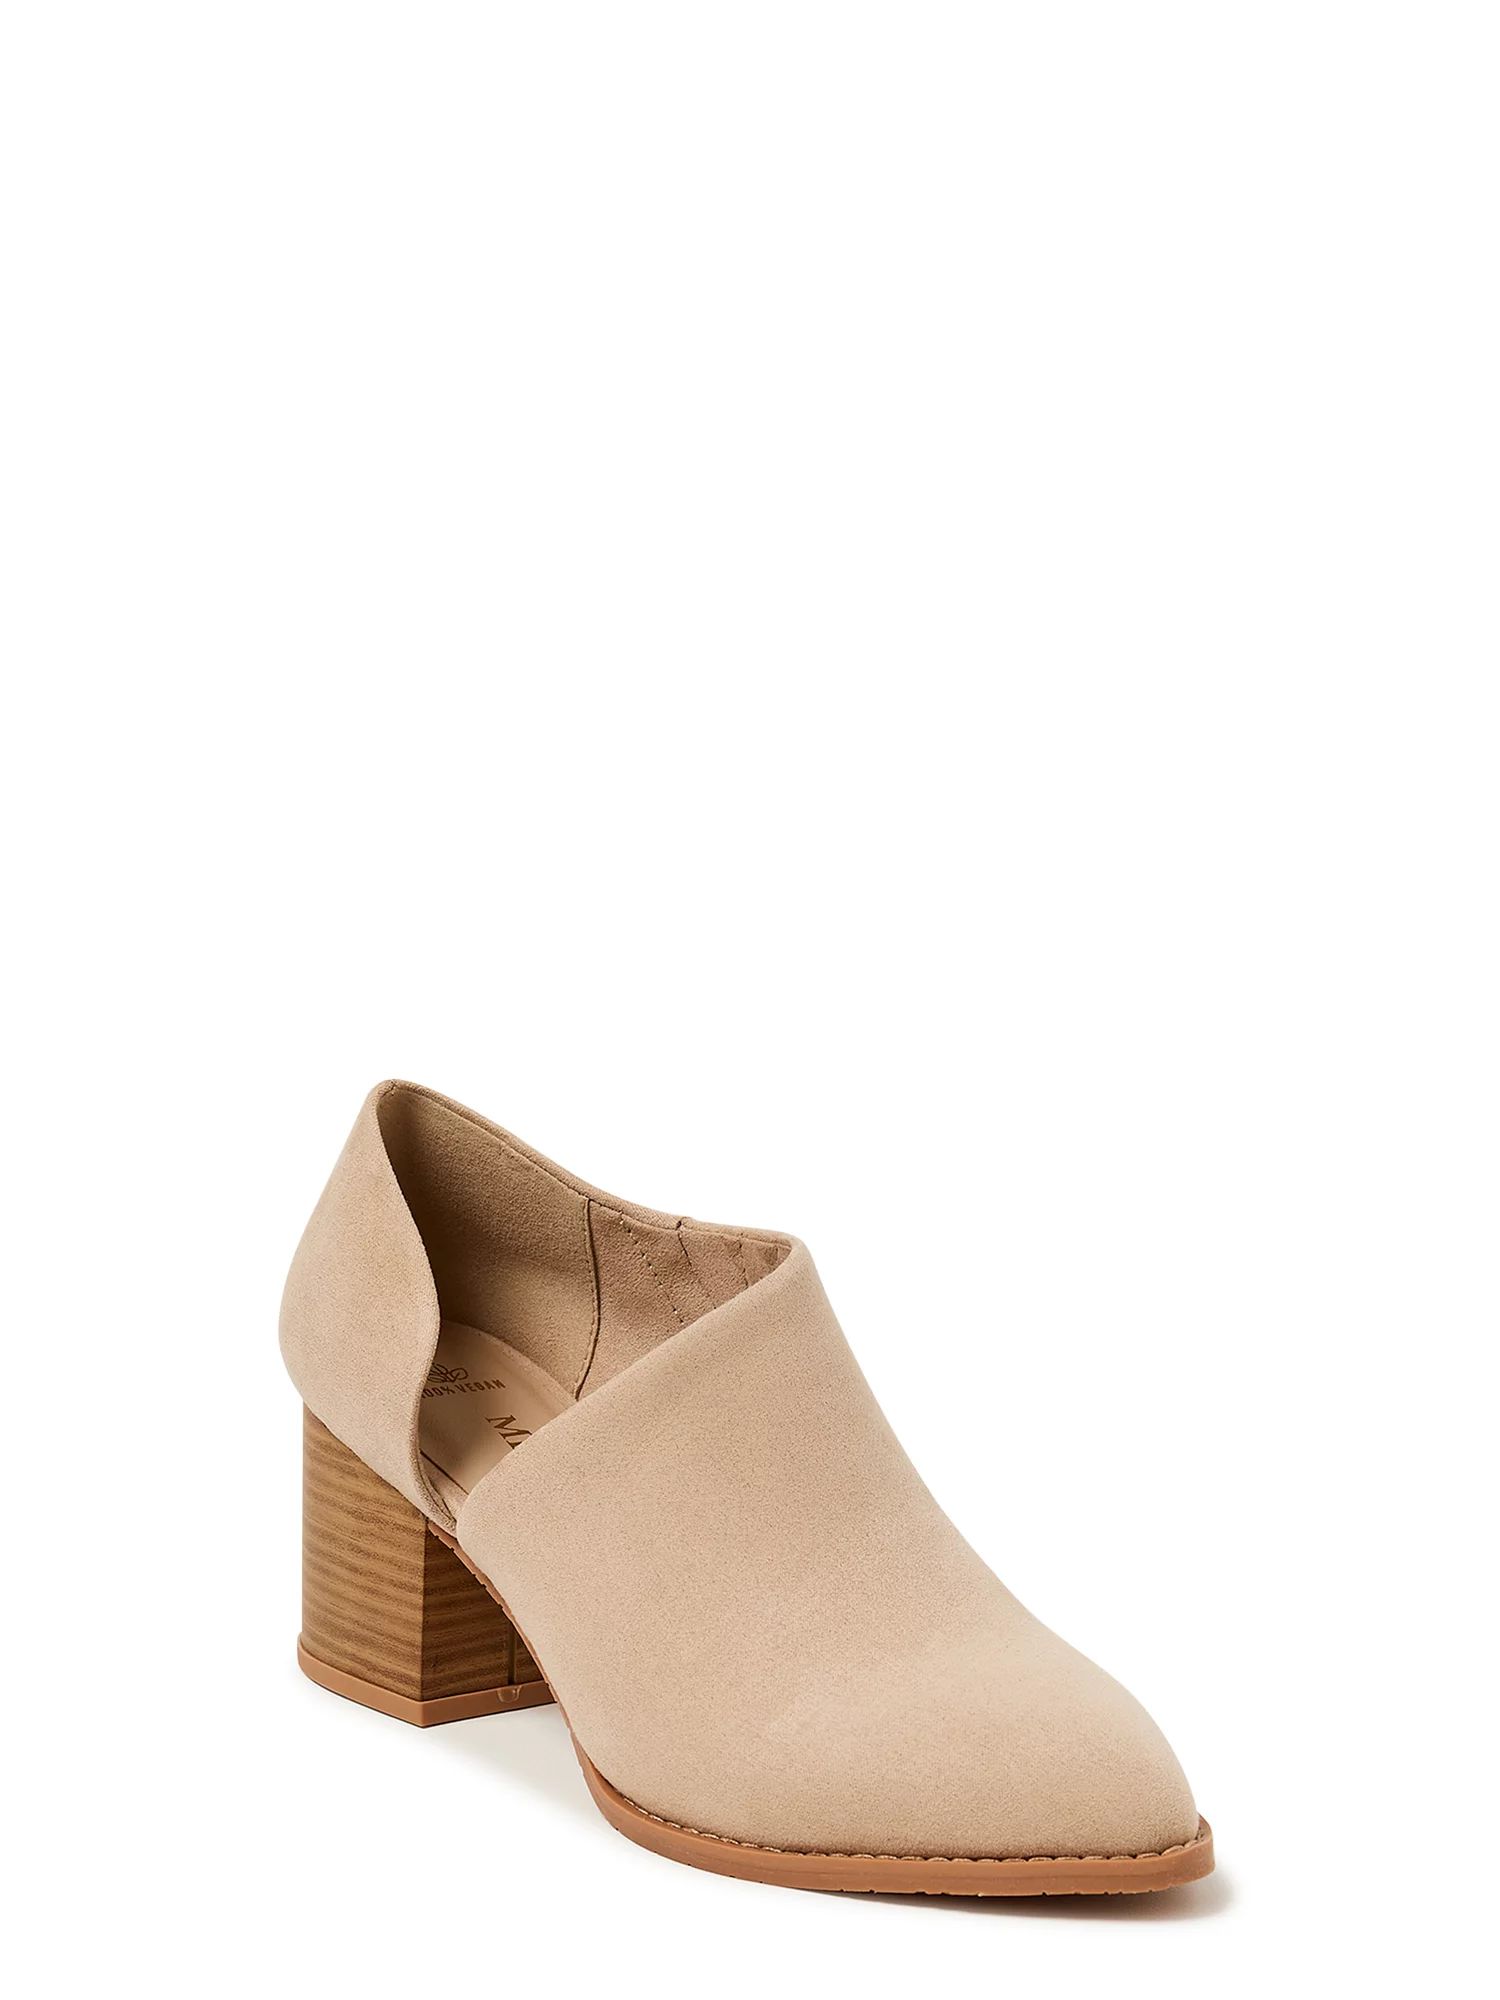 Melrose Ave Women’s Faux Leather Cut Out Booties with Block Heel | Walmart (US)